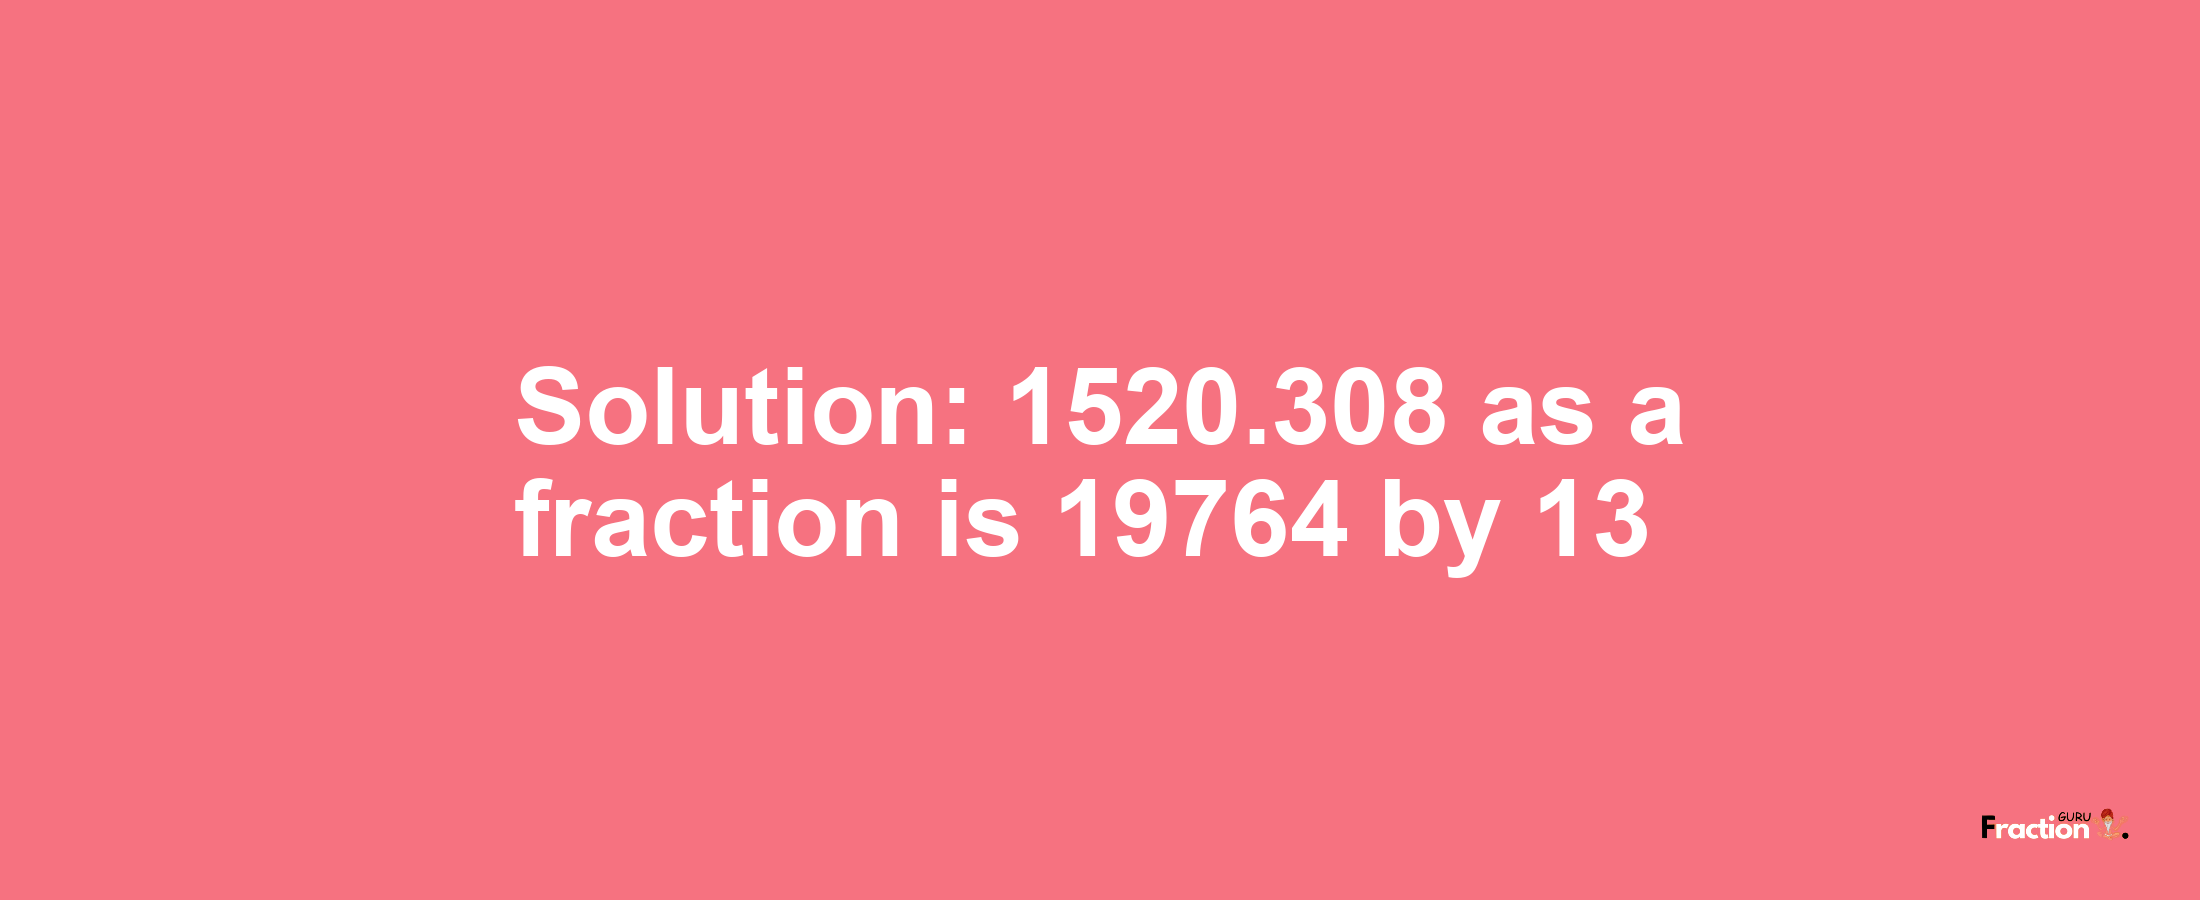 Solution:1520.308 as a fraction is 19764/13